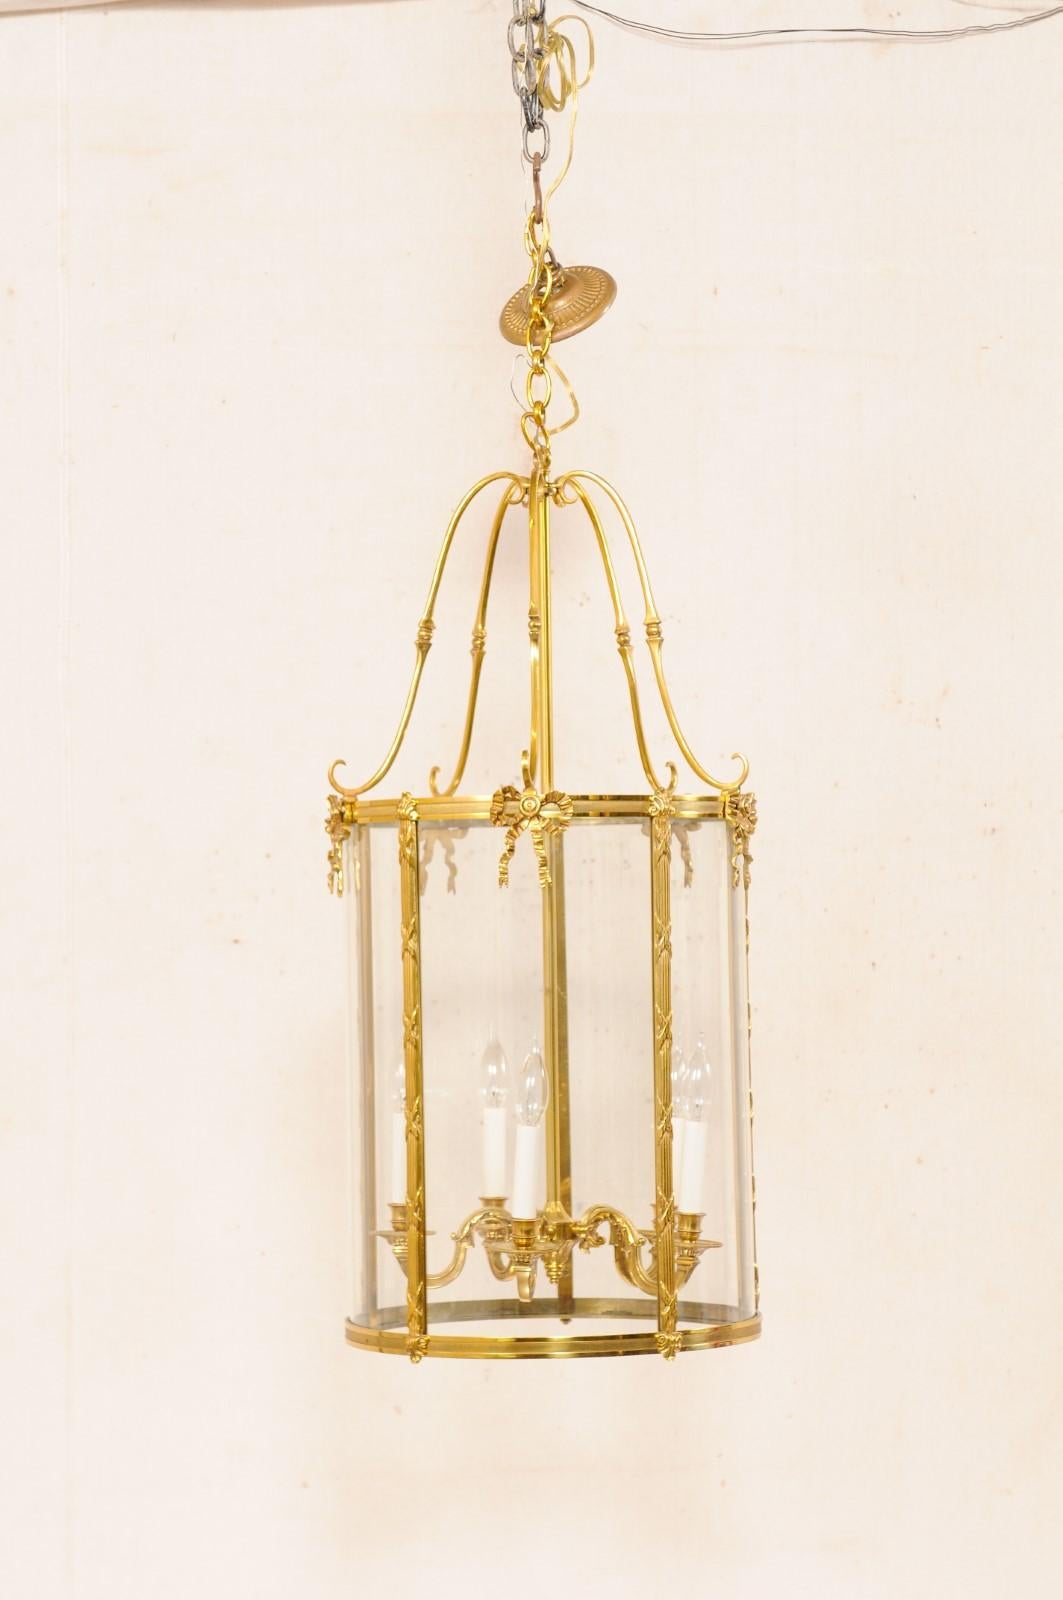 An English pair of large-size Adam style 5-light hanging brass lanterns. This vintage pair of lanterns from England, with their suspended domed-tops and tubular shaped bodies, have brass armature, with circular convex glass panels about the